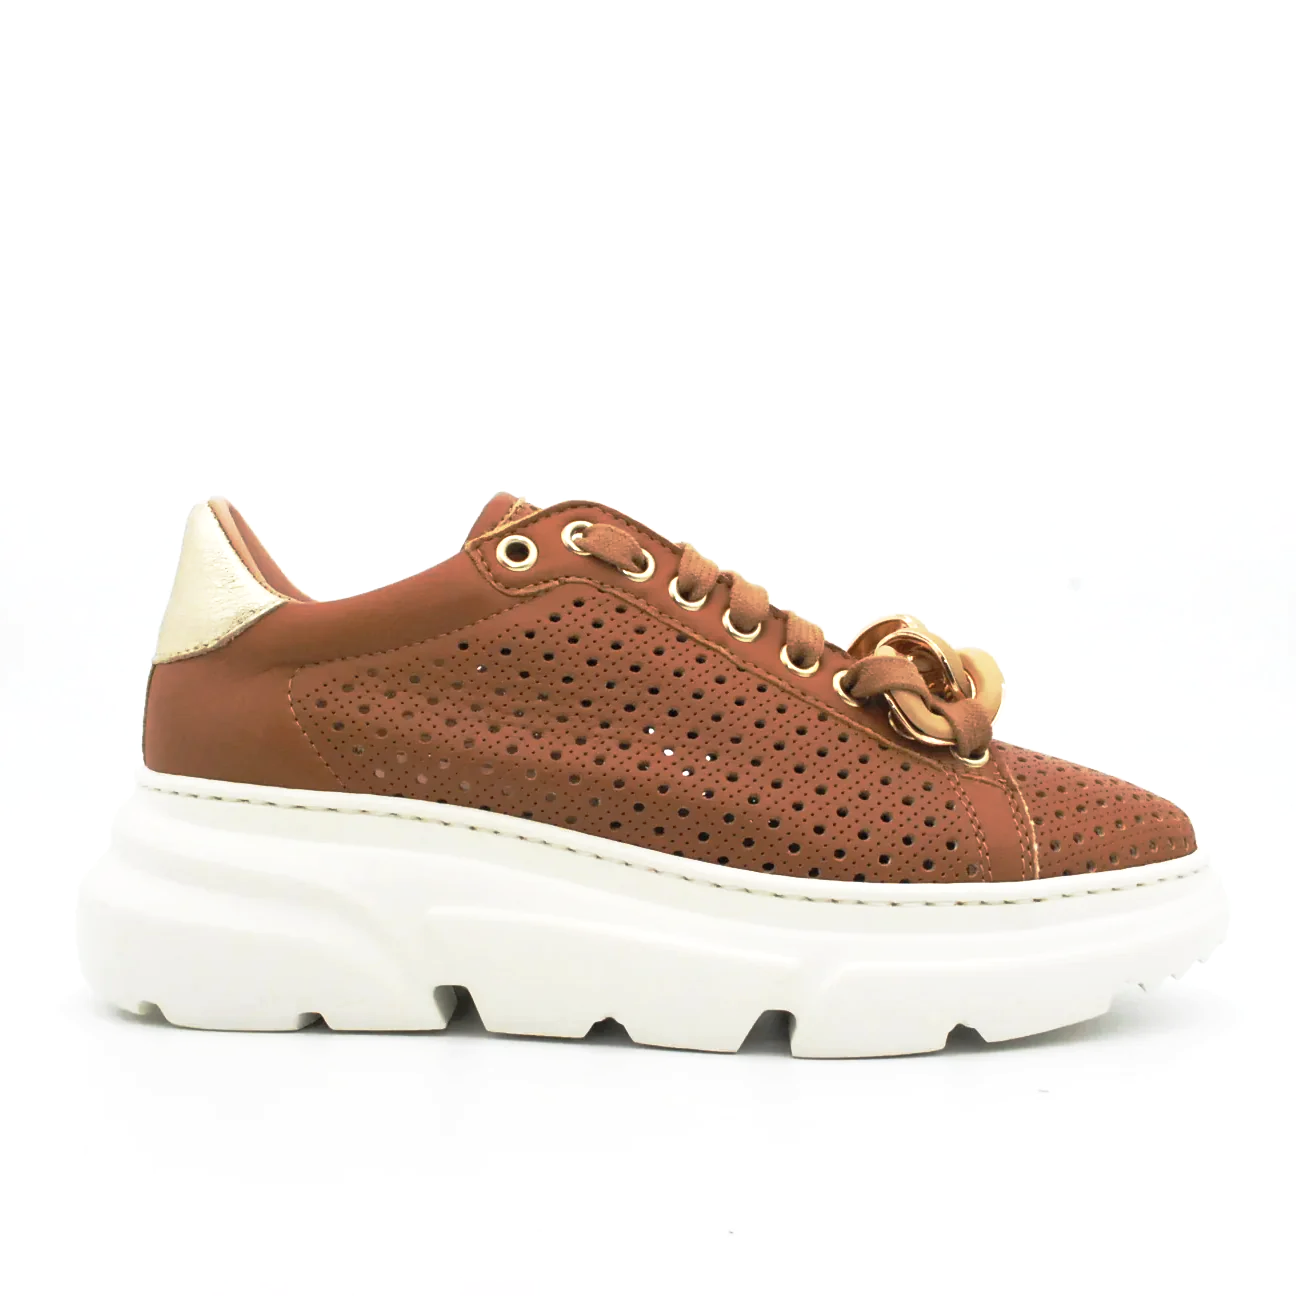 sneakers-stokton-in-pelle-forata-34-cuoio-pelle-sneakers.png